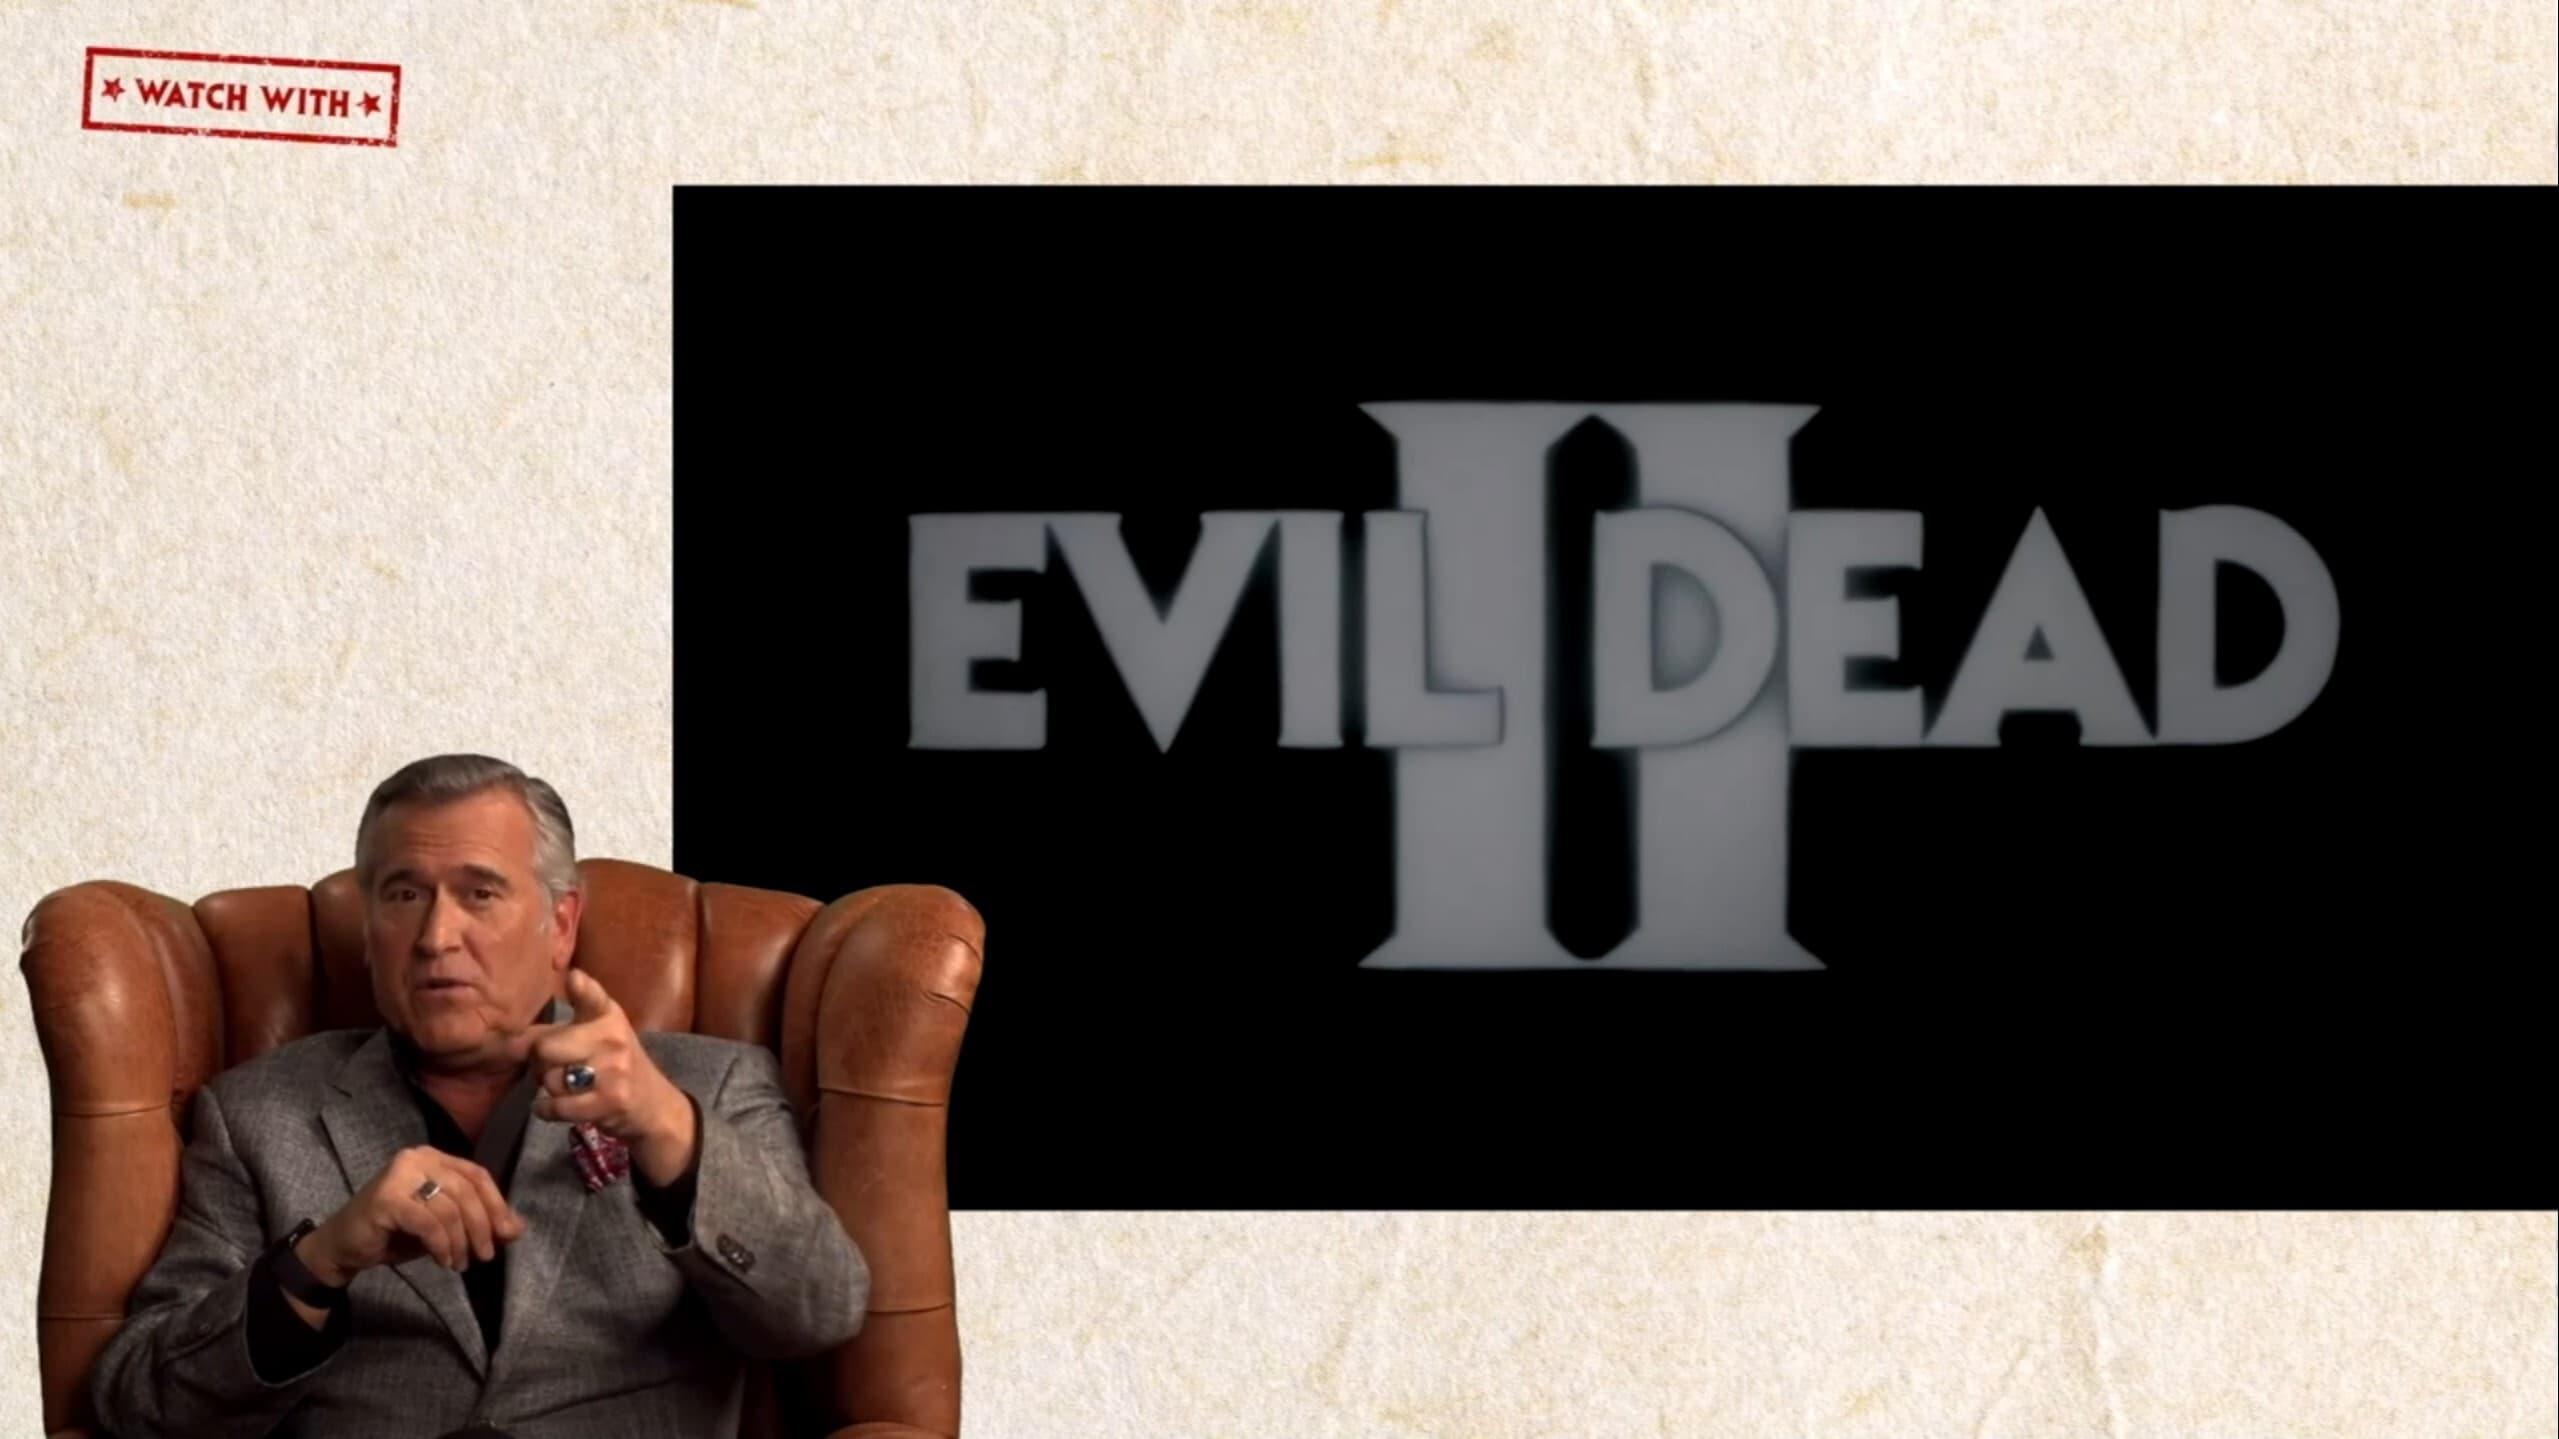 Watch With... Bruce Campbell presents Evil Dead II backdrop